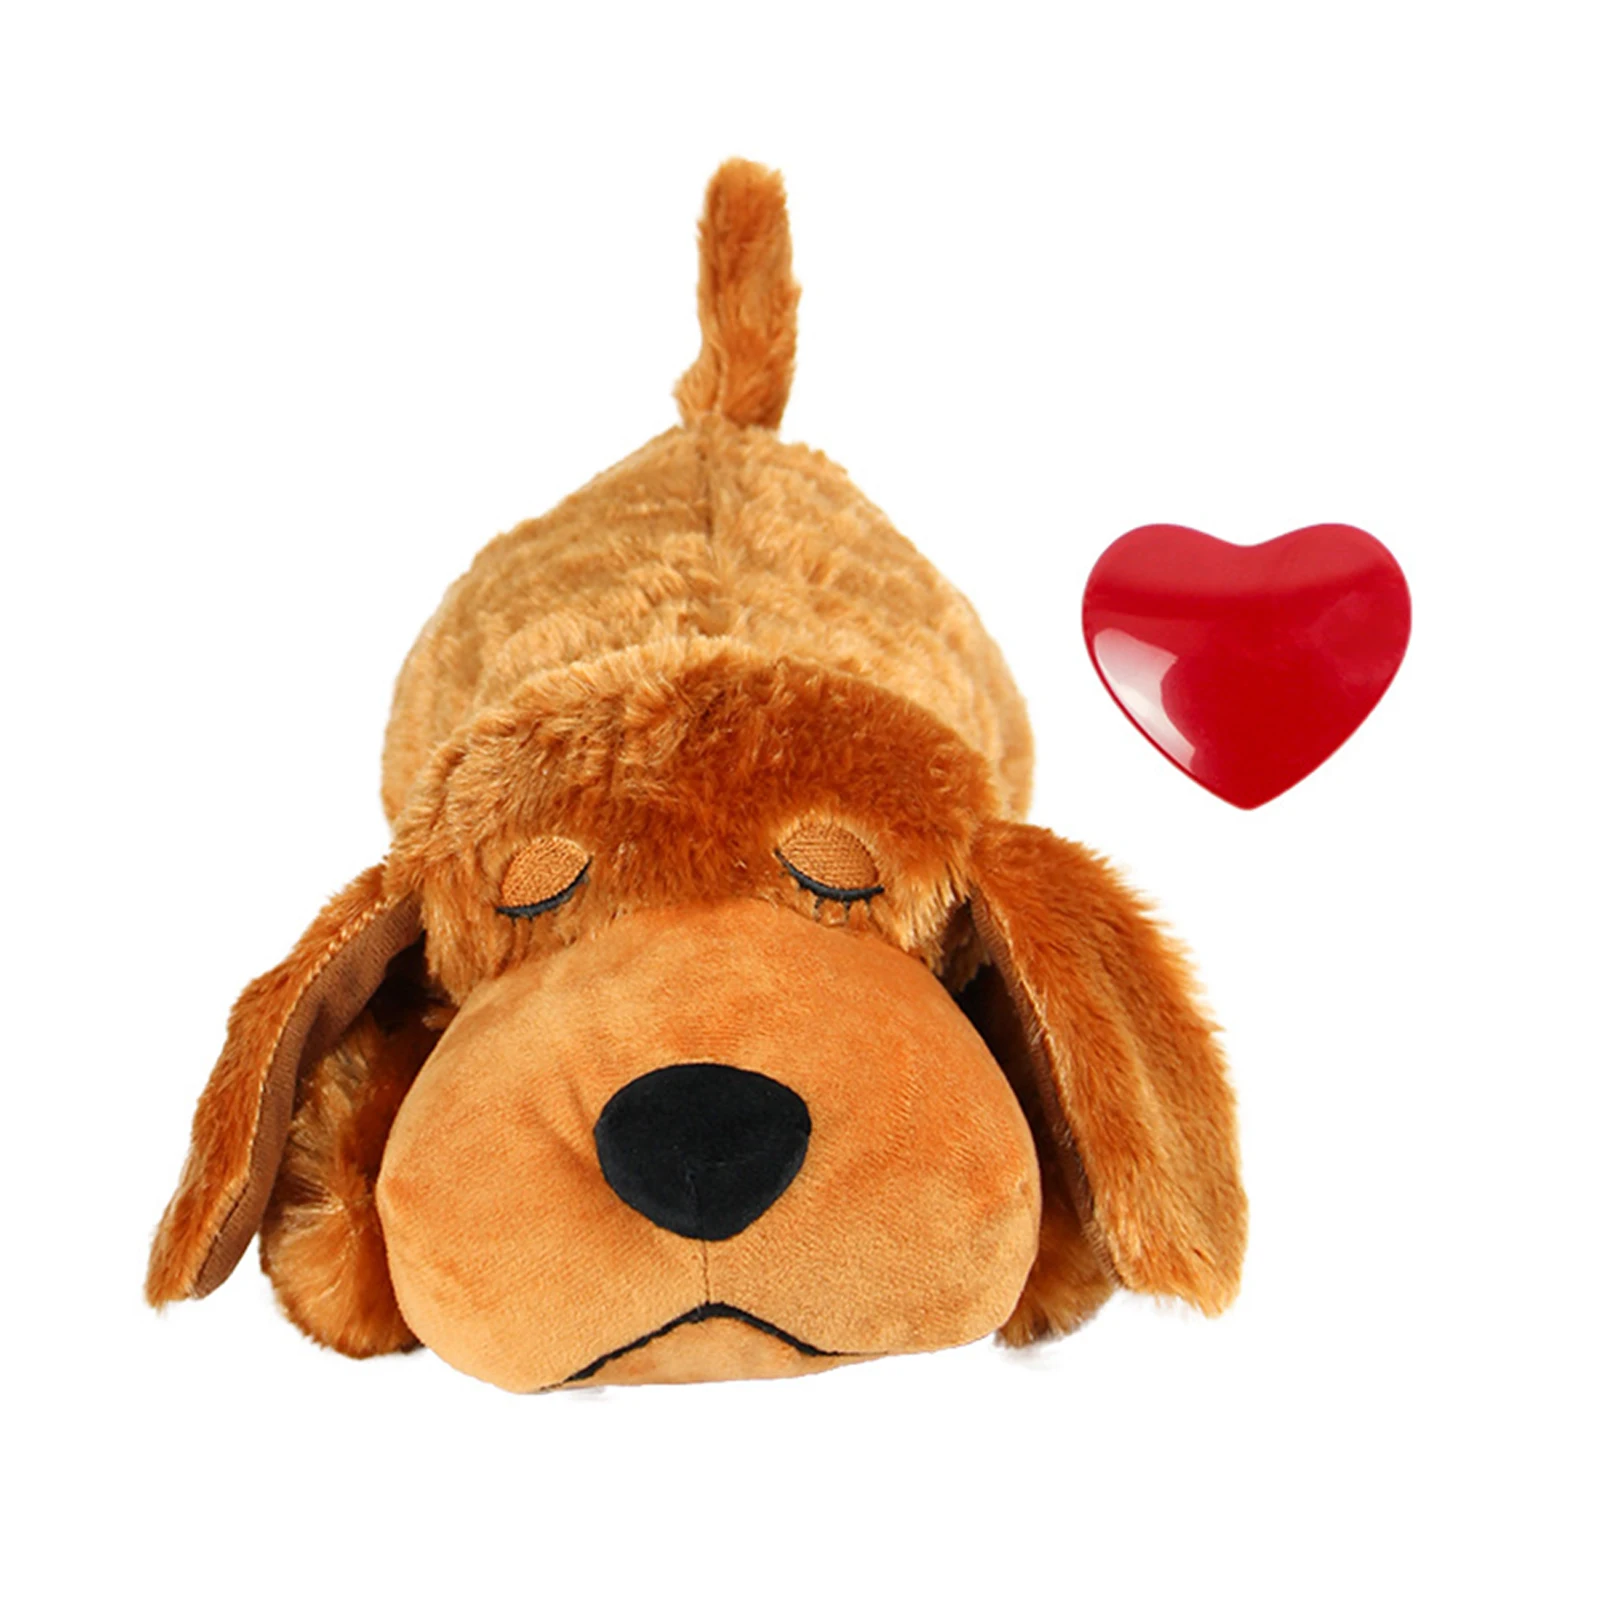 

Behavioral Stuffed Heartbeat Pet Supplies Anxiety Relief Training Dog Toy Washable Sleep Aid Snuggle Cute Durable Soft Plush